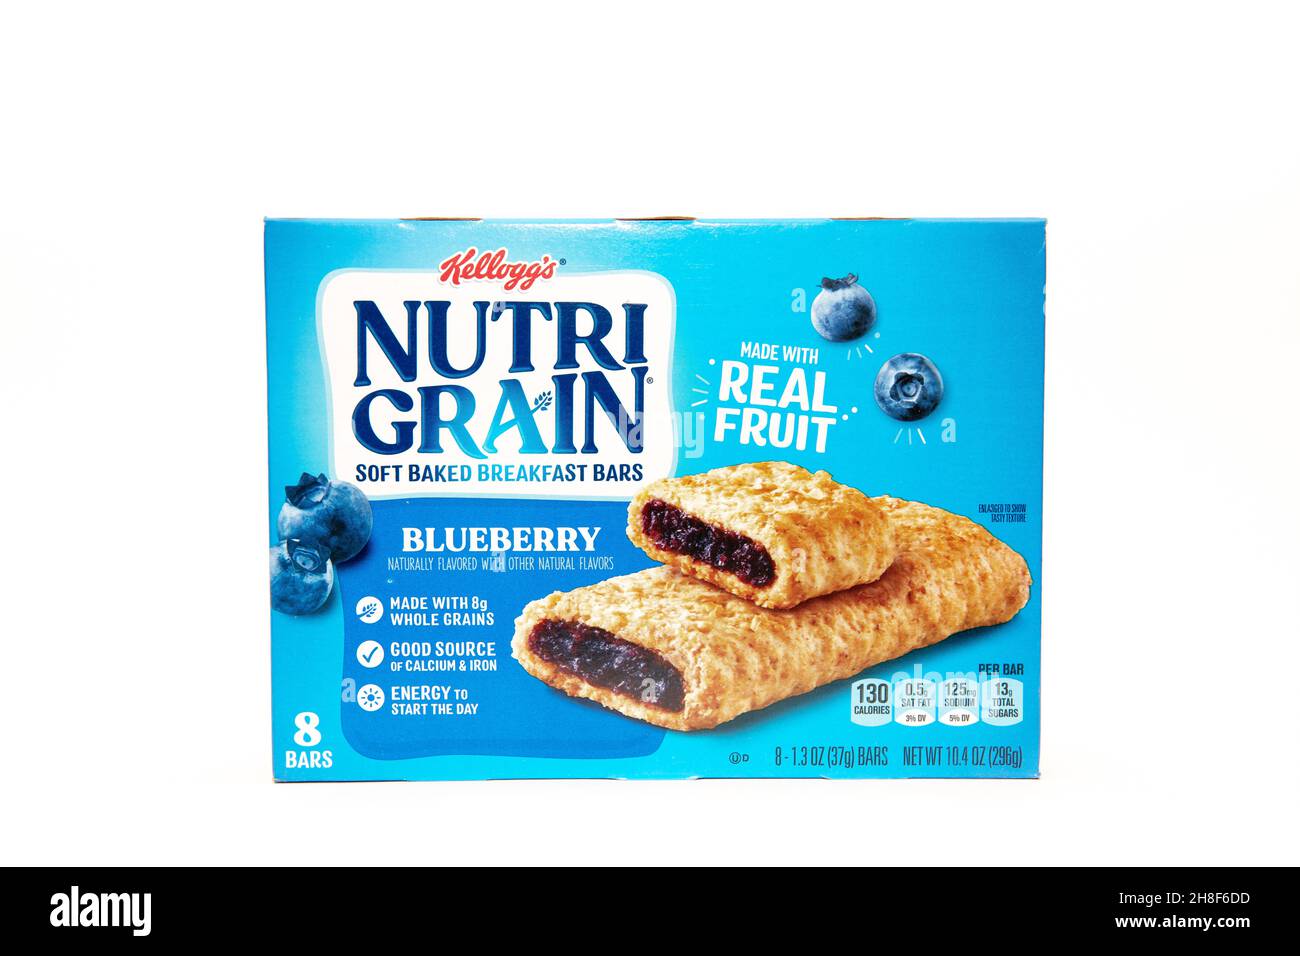 A box of 8 Kellogg's Nutri Grain Blueberry soft baked breakfast bars made with real fruit and whole grains Stock Photo